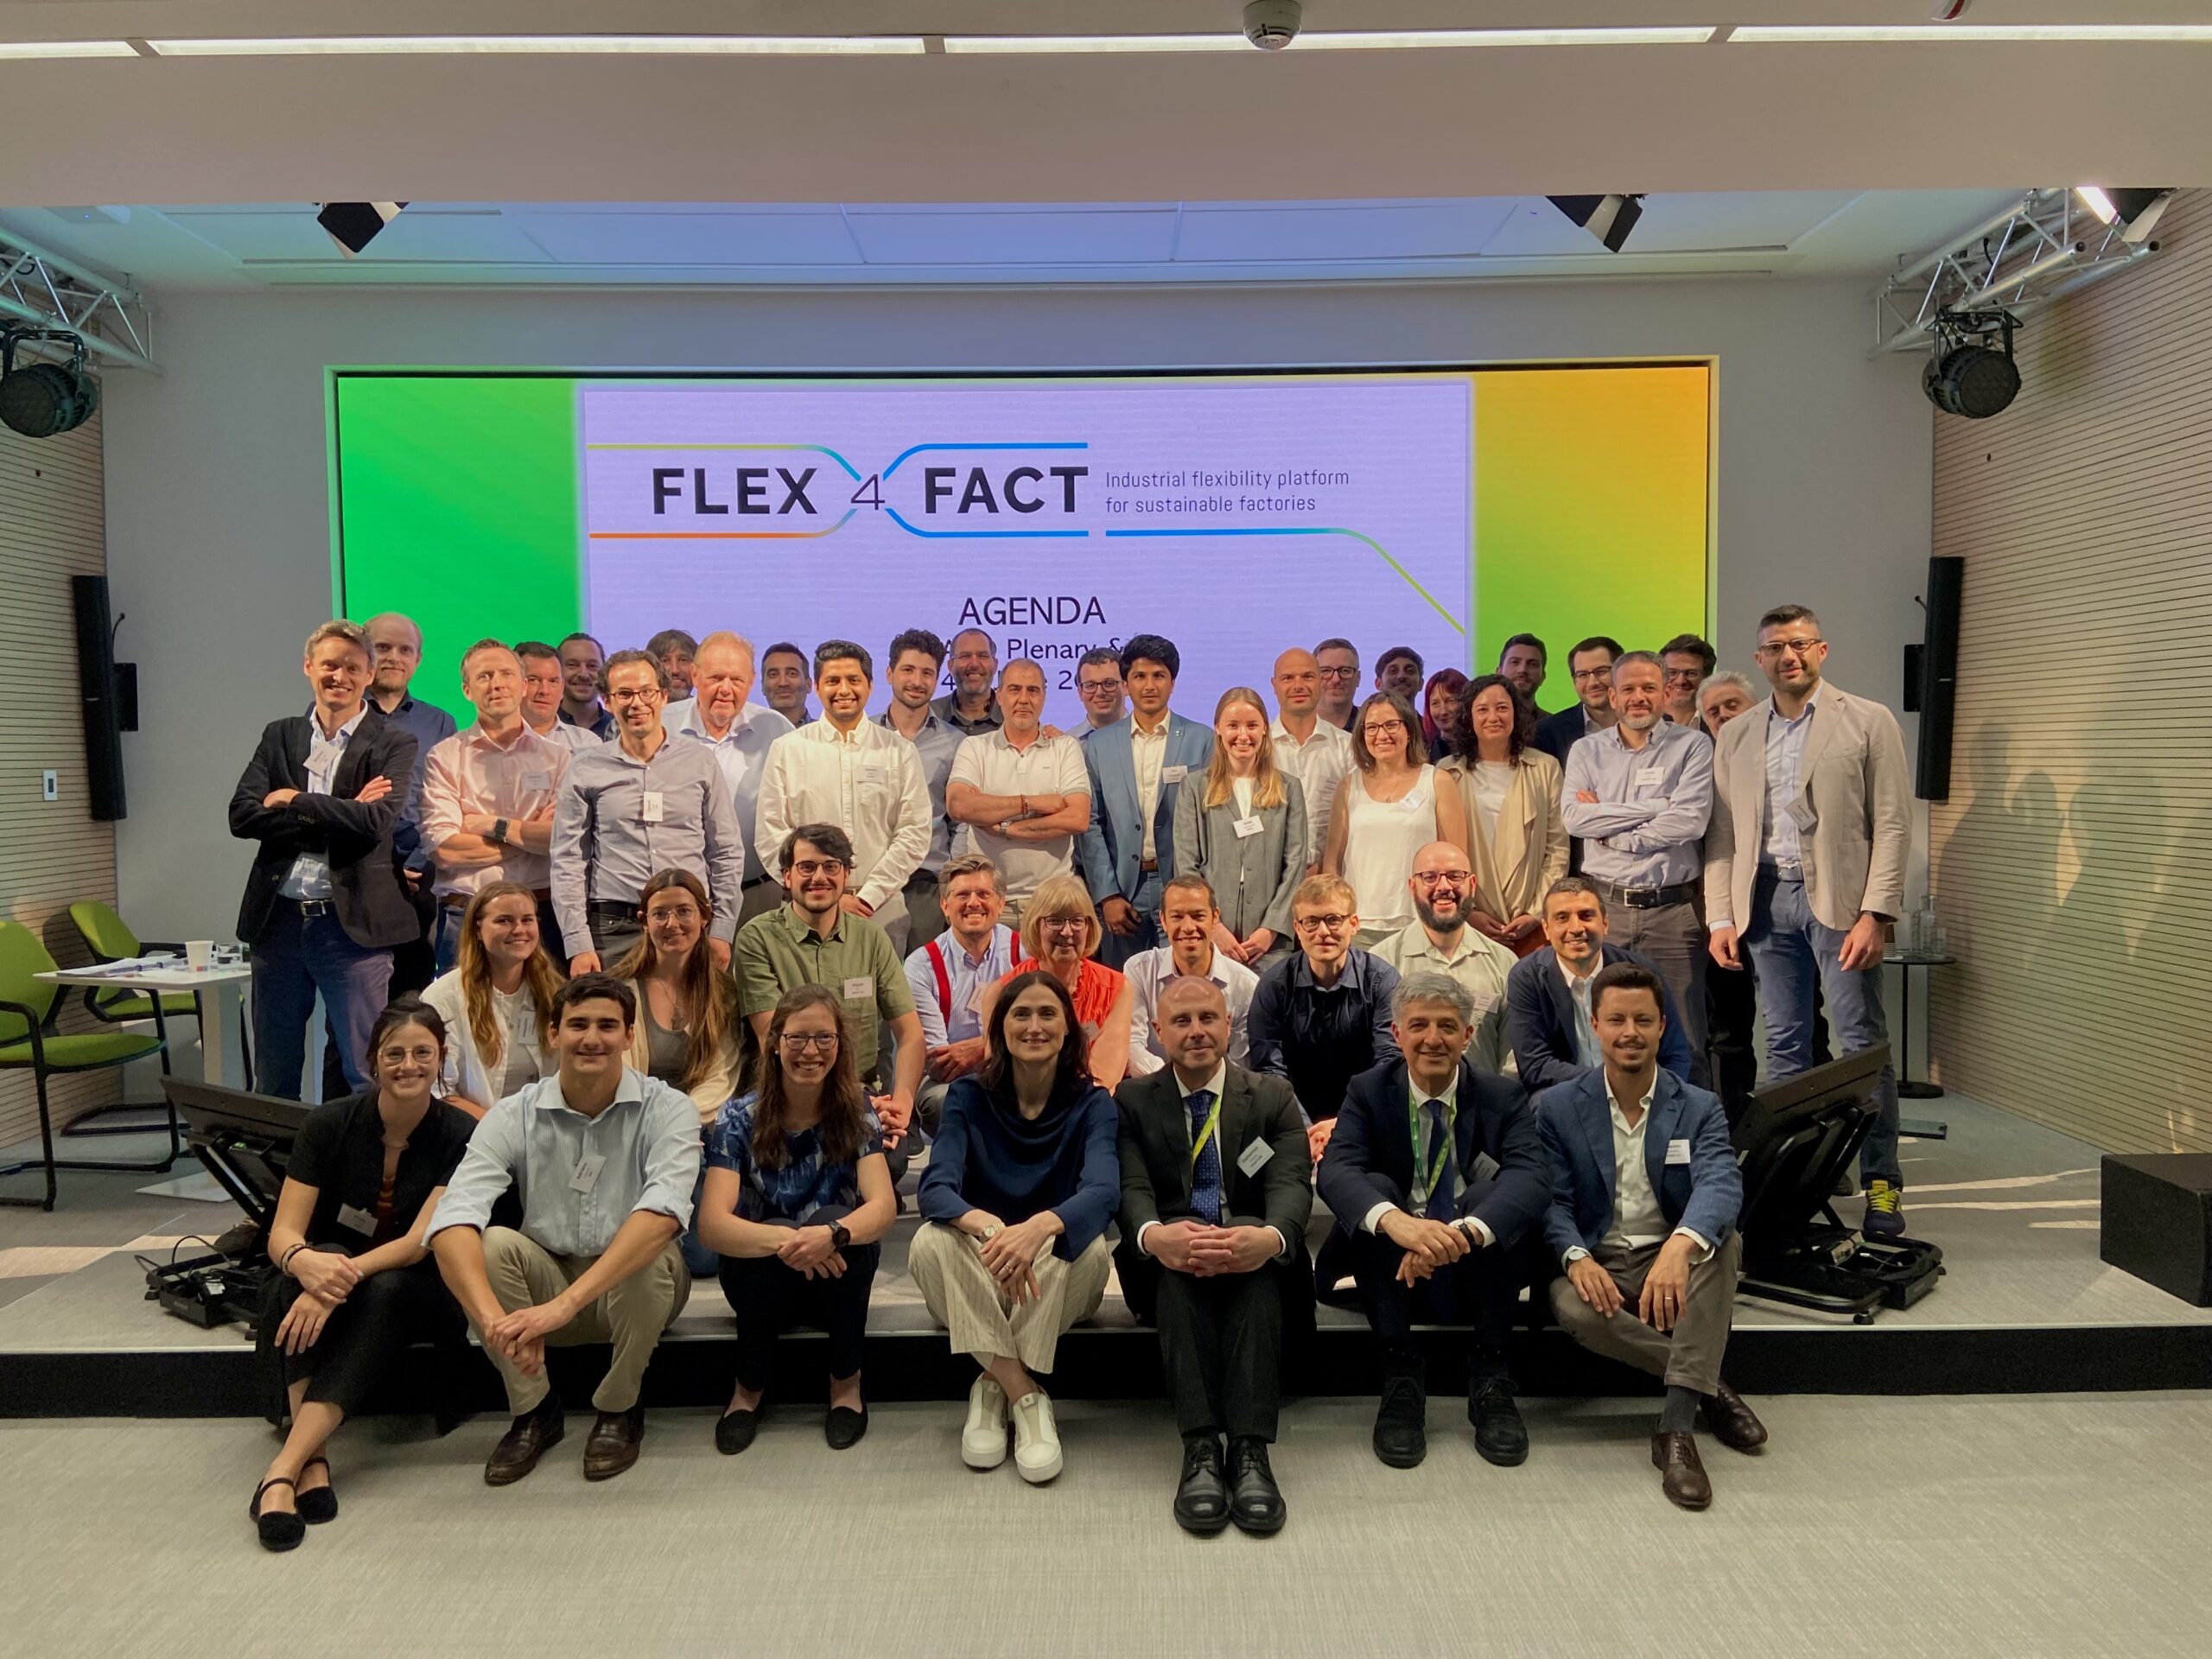 FLEX4FACT Partner Meeting in Milan – Advancing Industrial Energy Flexibility and Sustainability